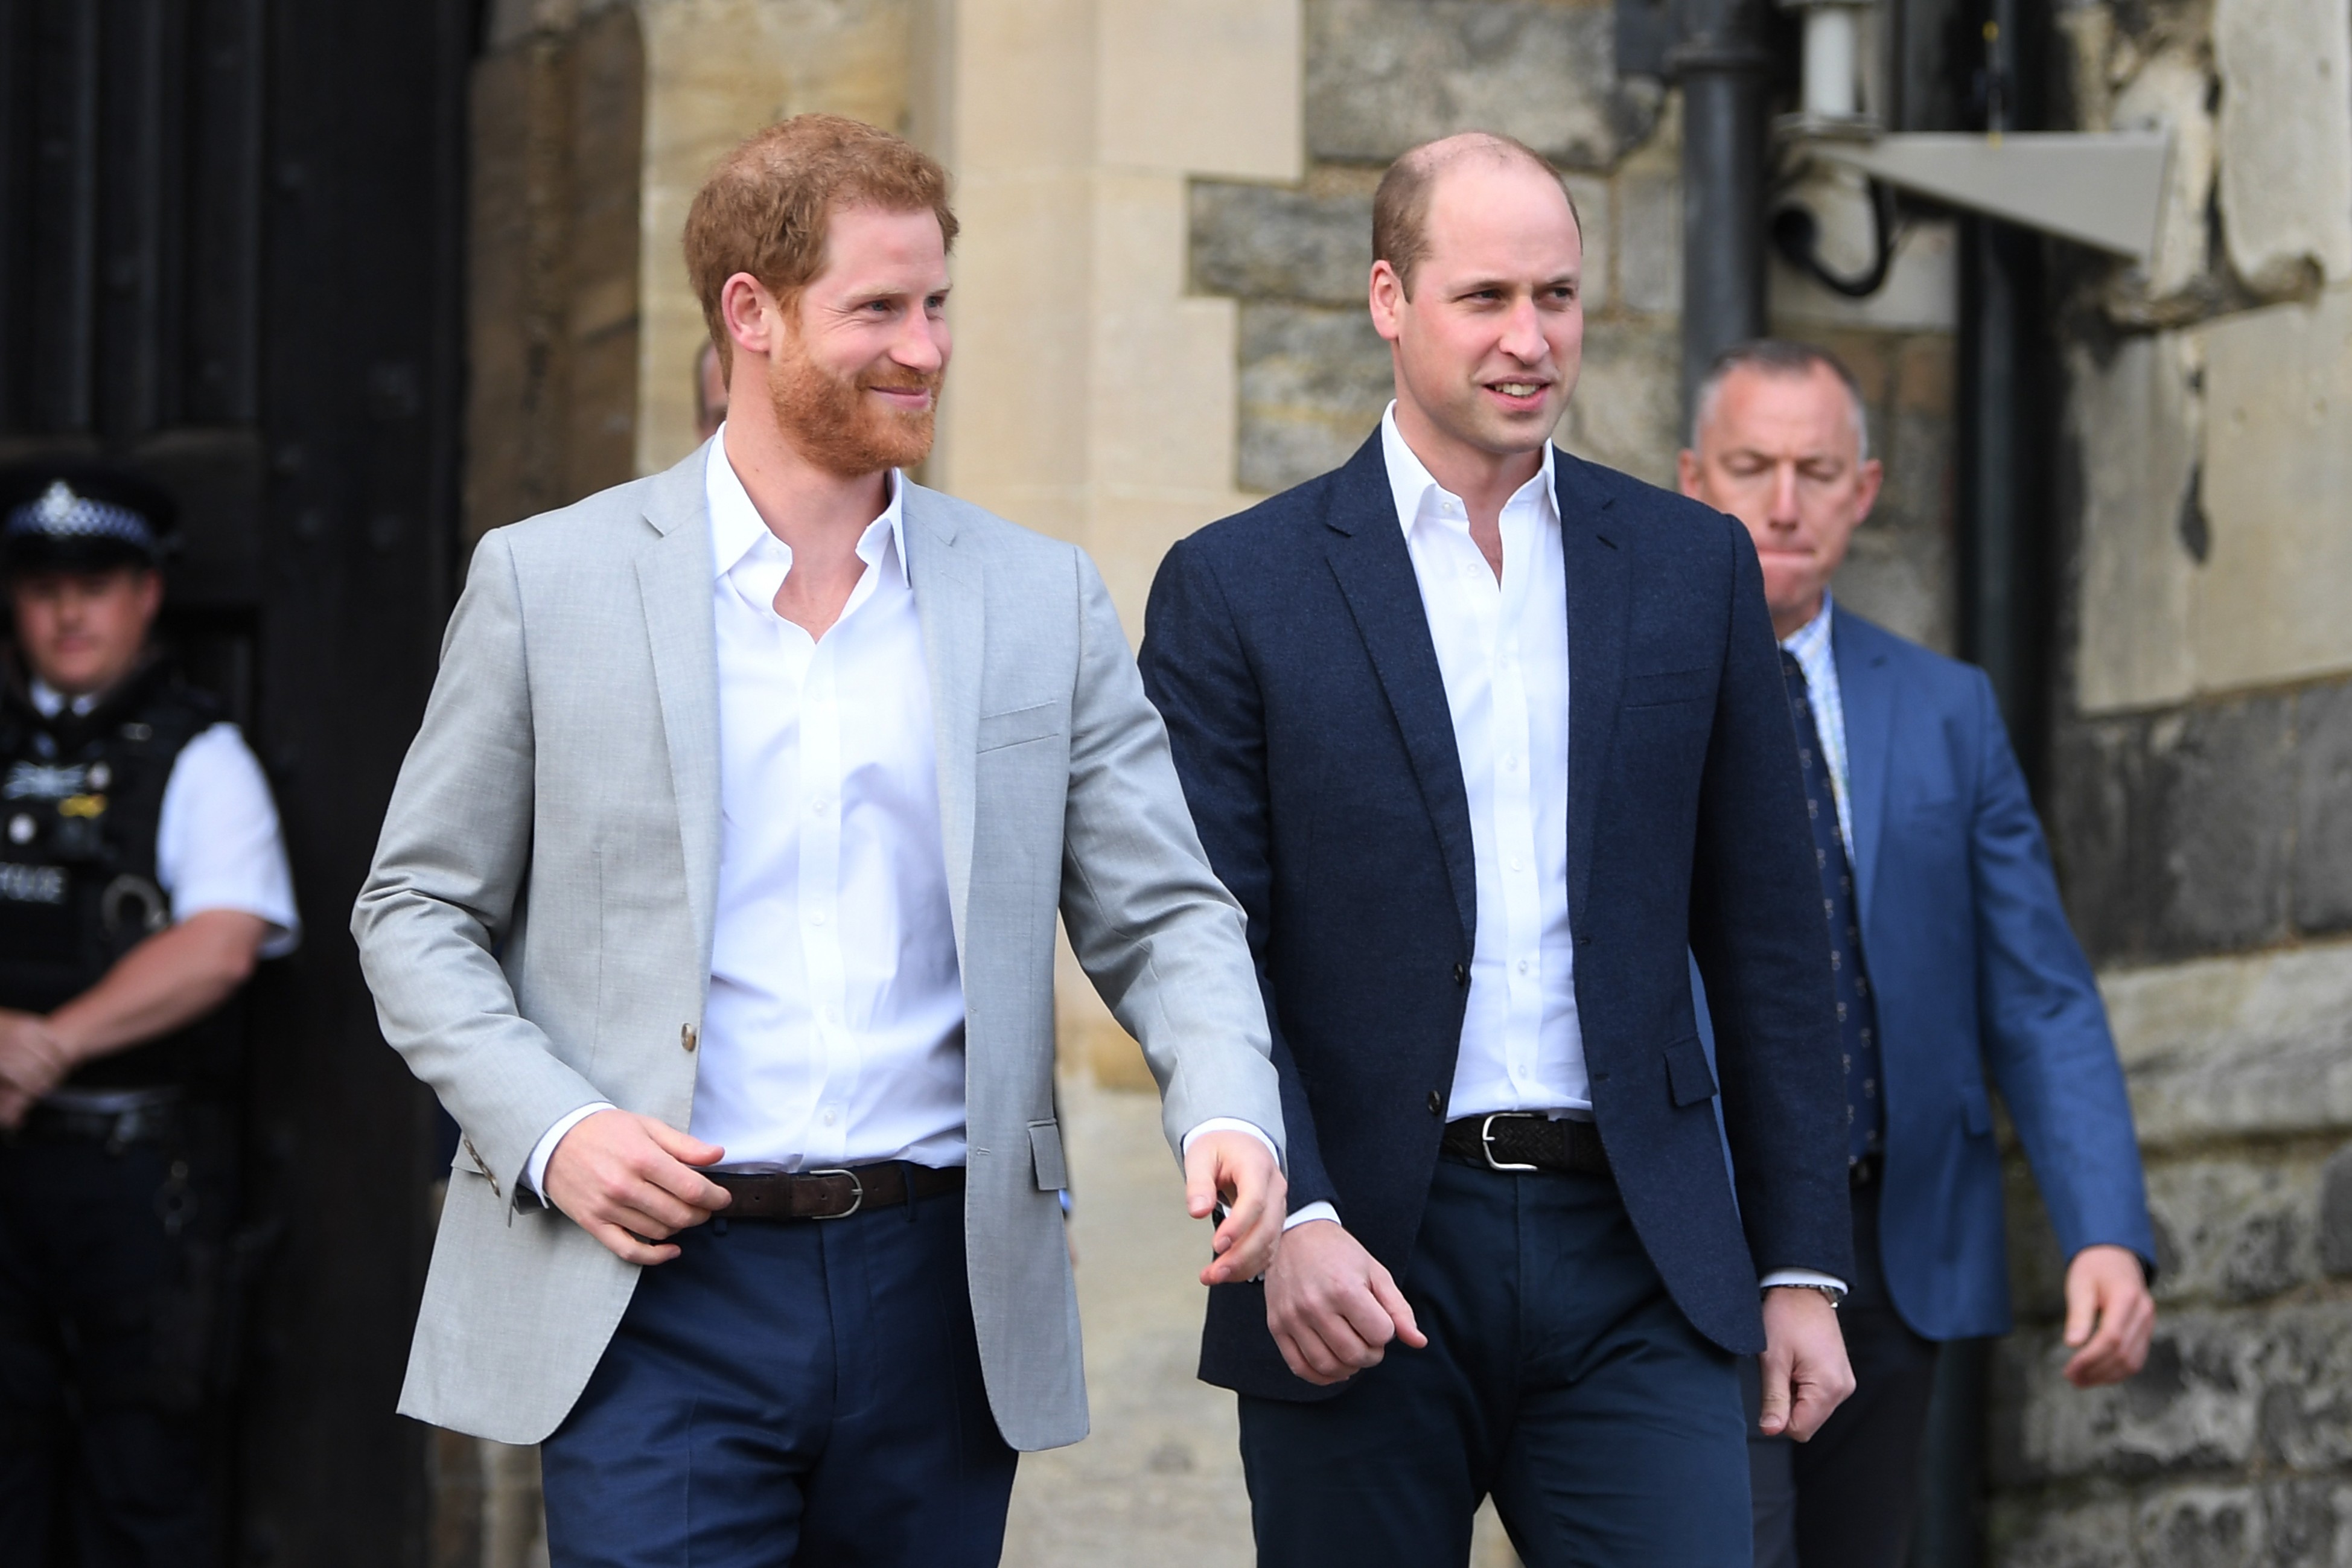 Prince William and Prince Harry (Image: Getty Images)